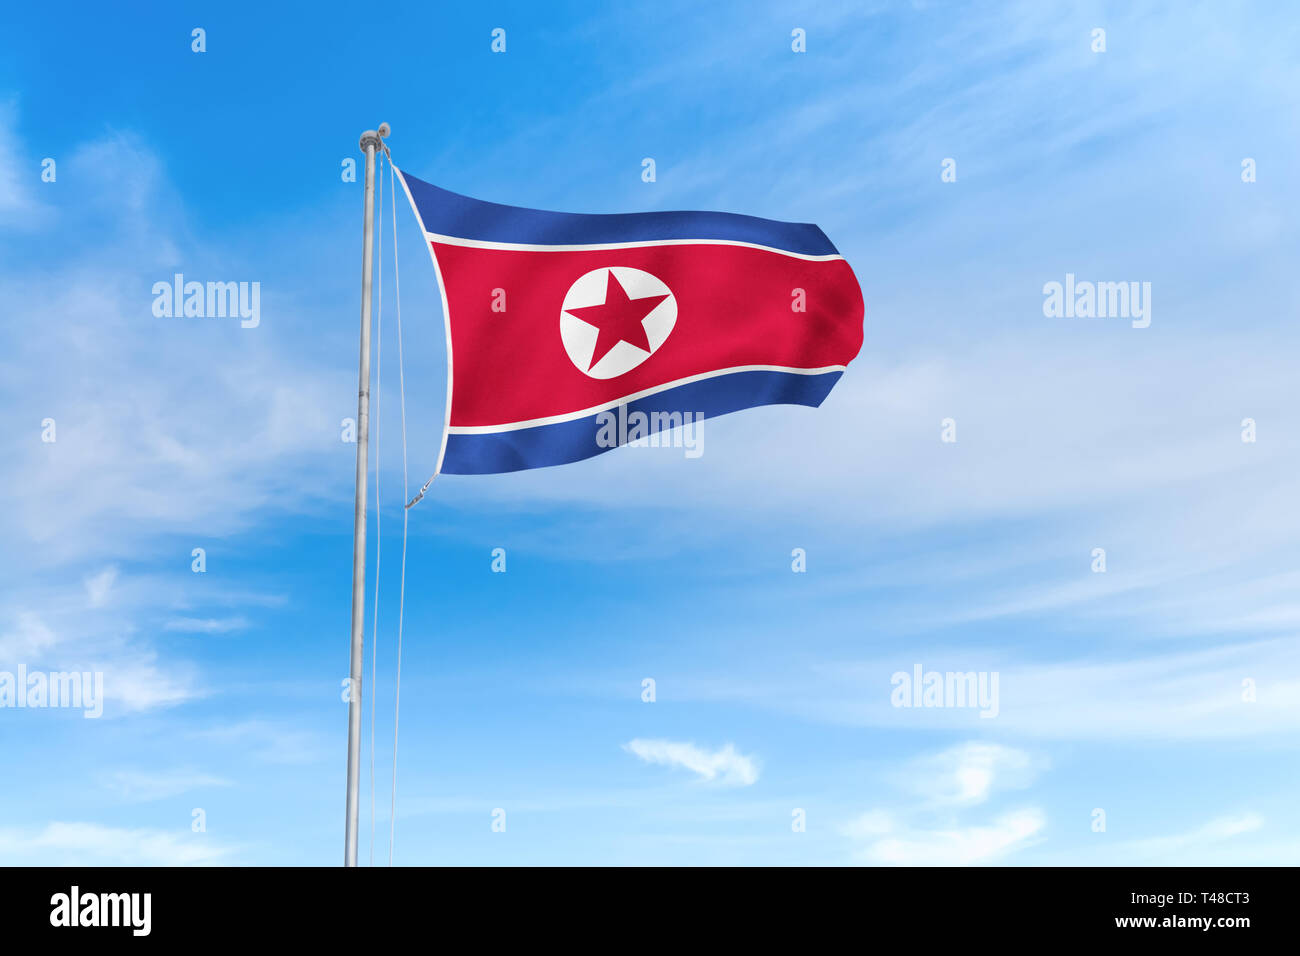 North Korea flag blowing in the wind over nice blue sky background Stock Photo